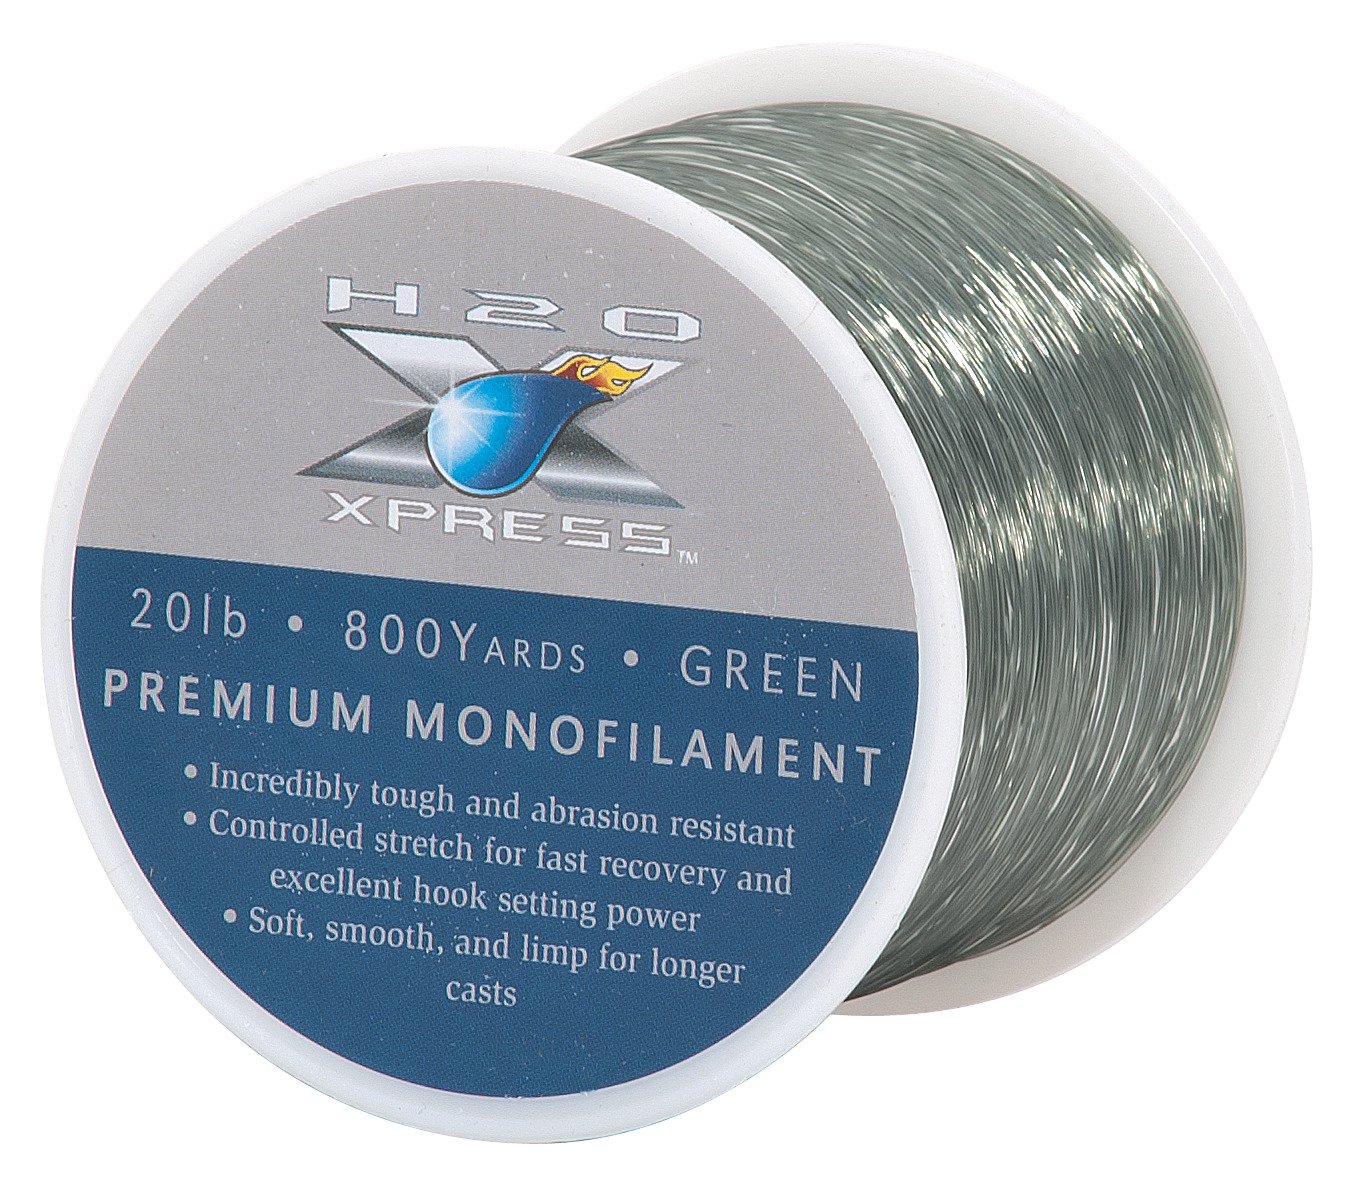 Academy Sports + Outdoors H2O XPRESS 8 lb - 2,000 yd Monofilament Fishing  Line